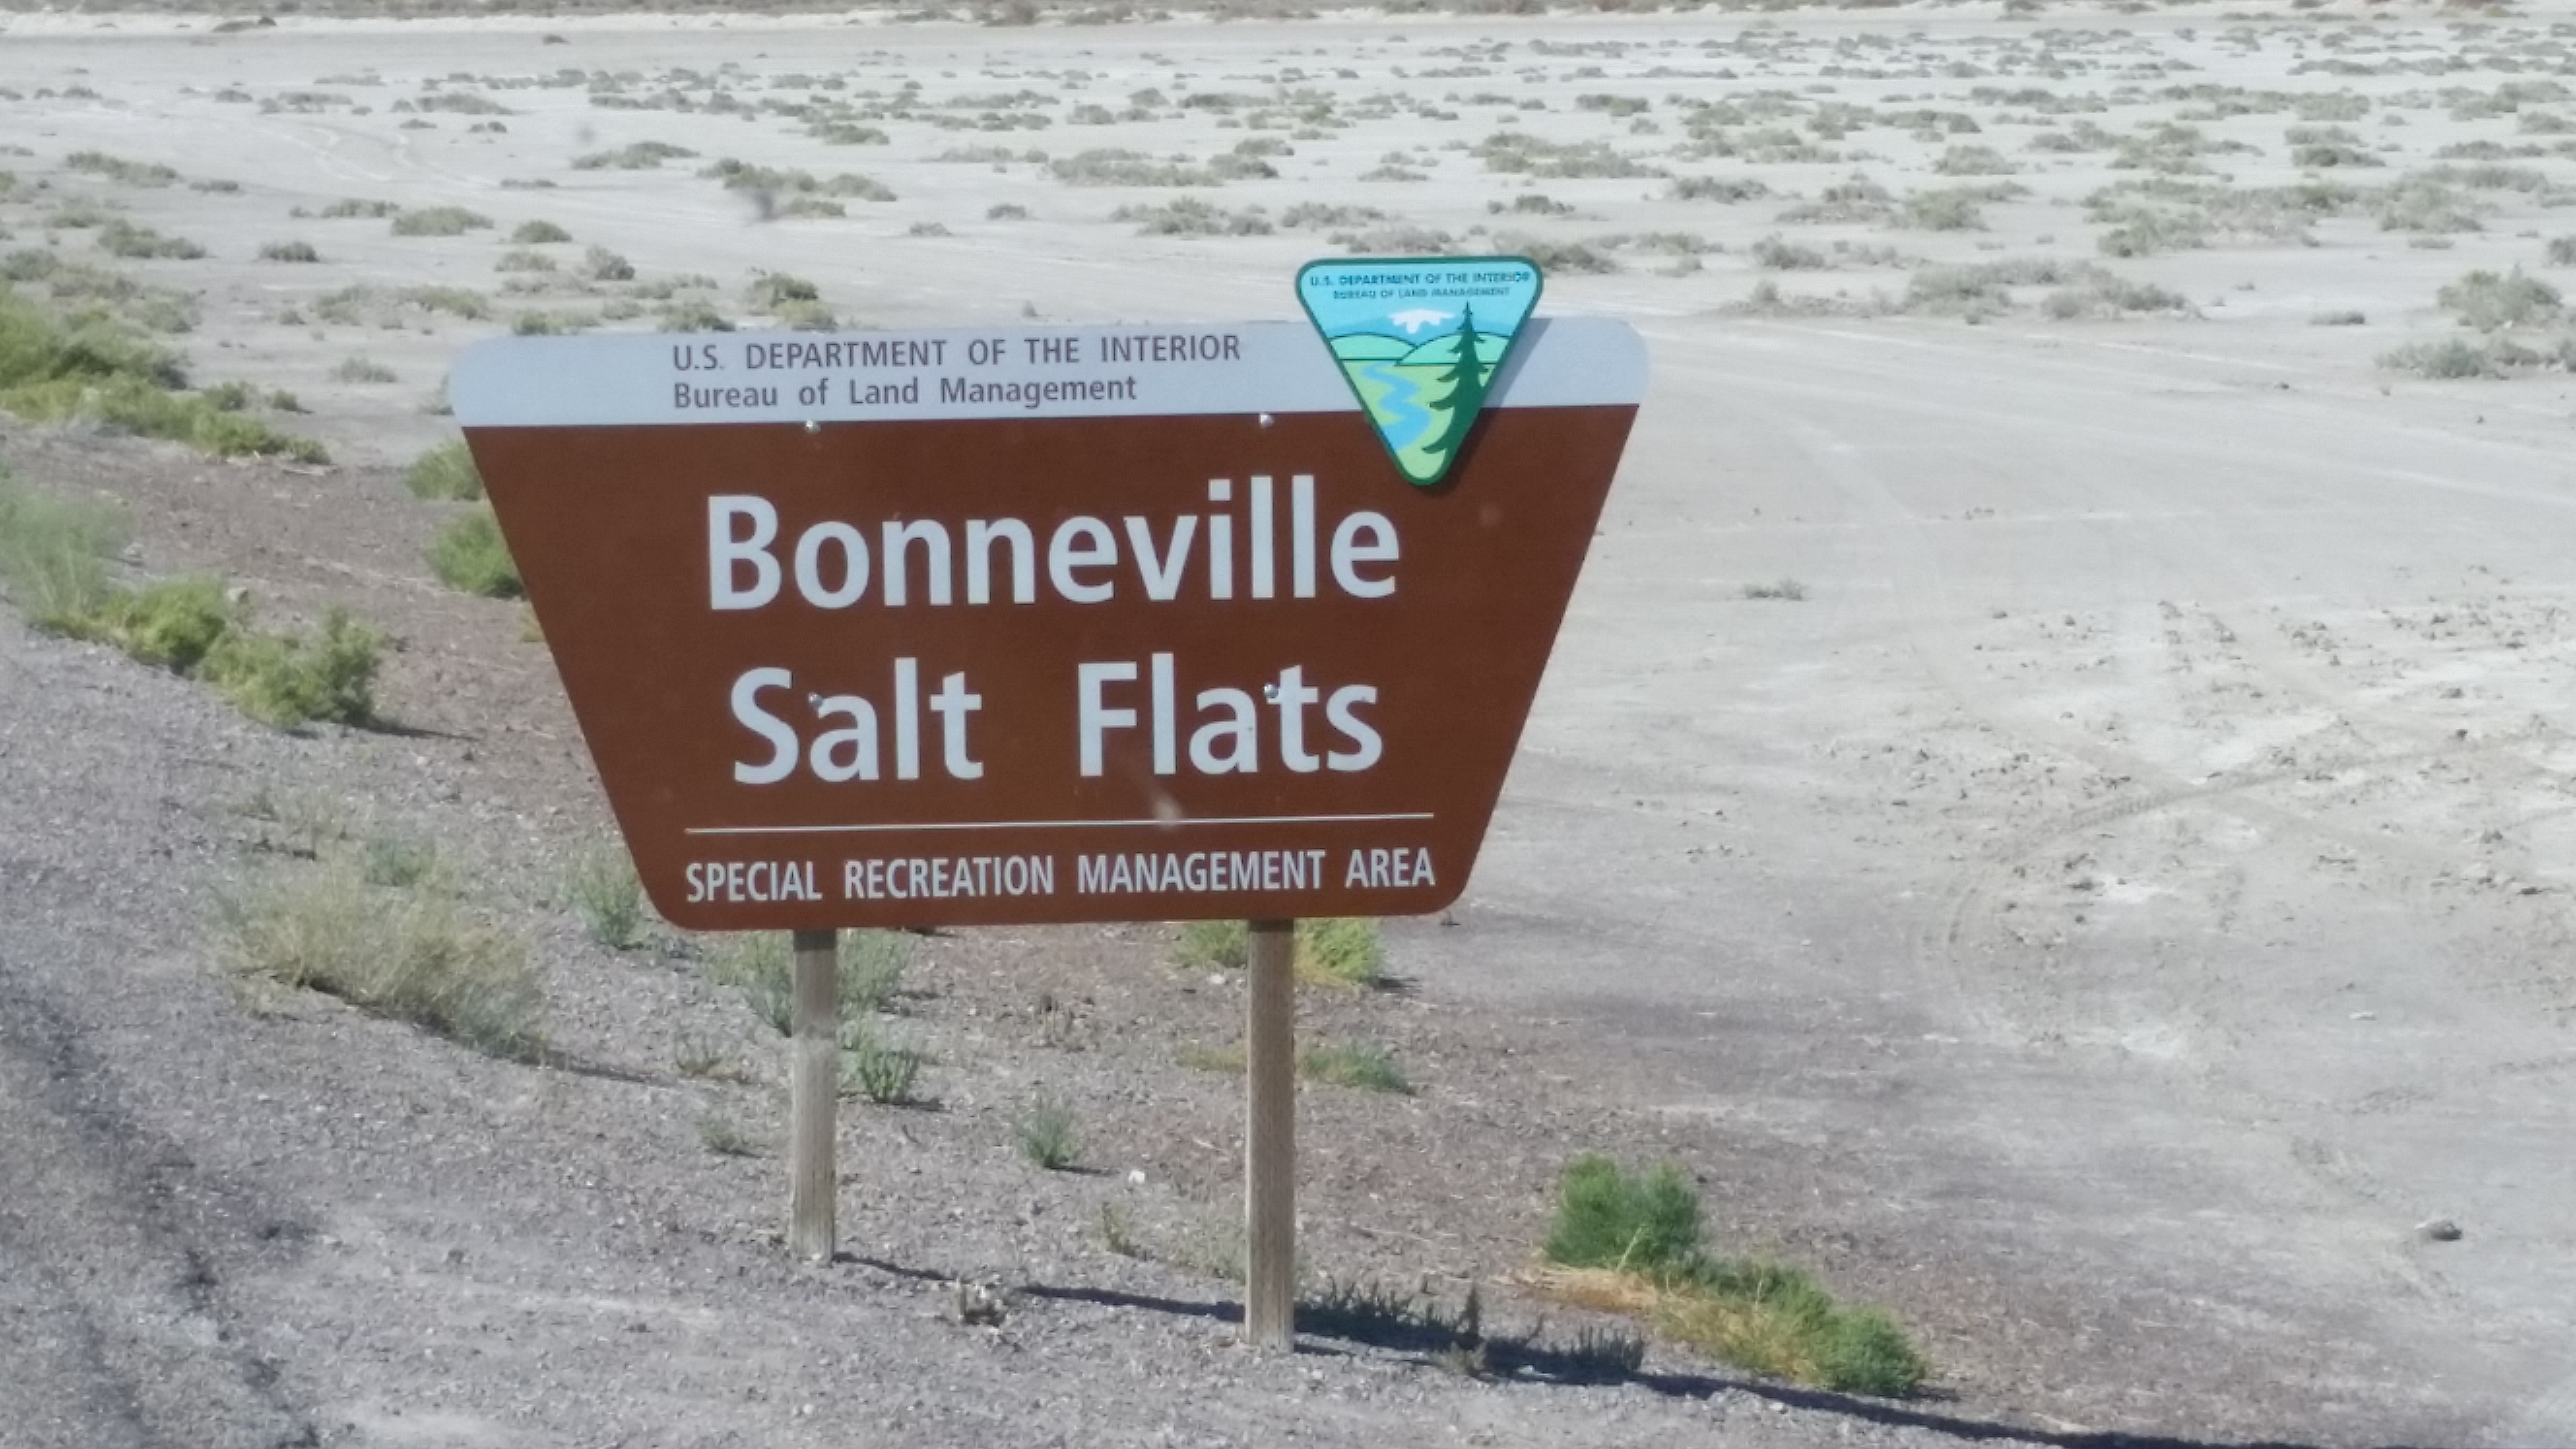 What is road salt made of?